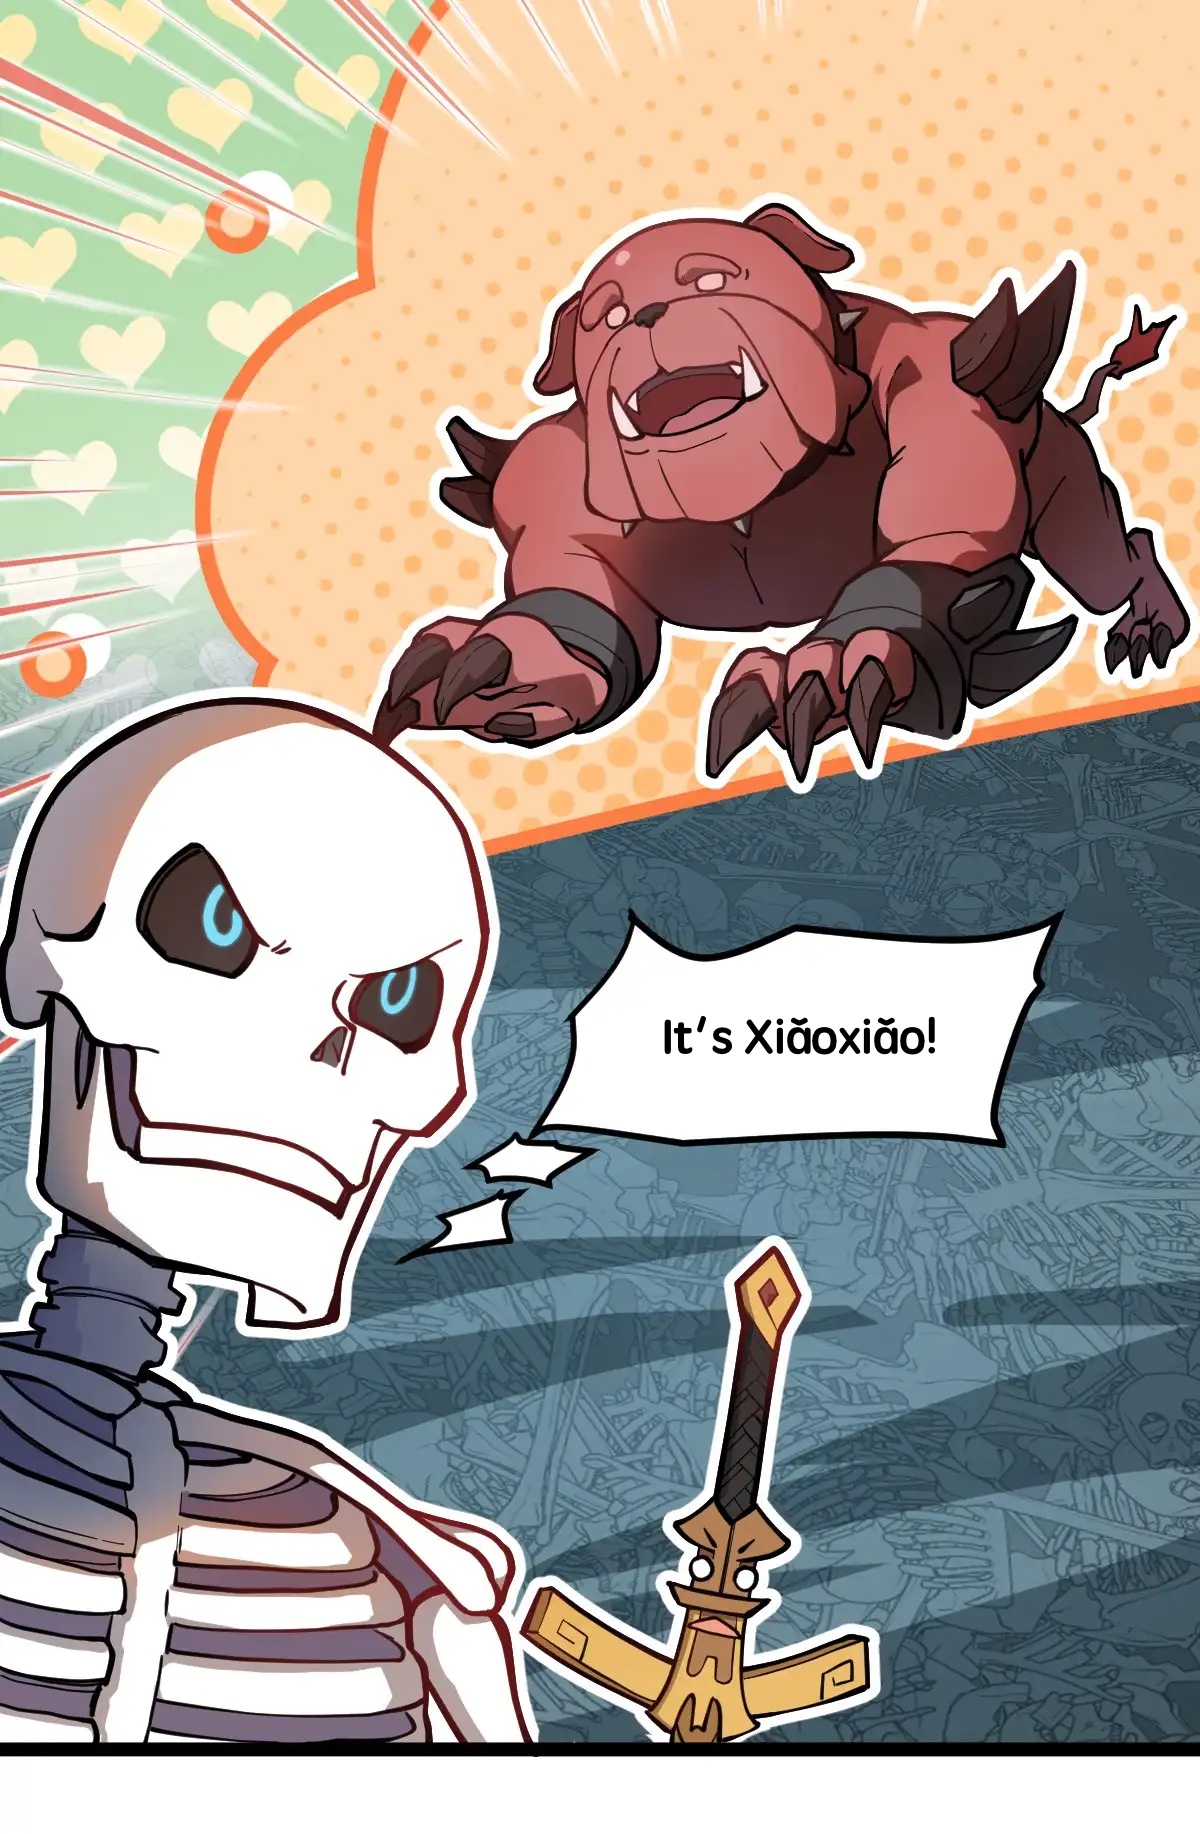 Little Skeleton Ch. 20 This new skill is kinda garbage.